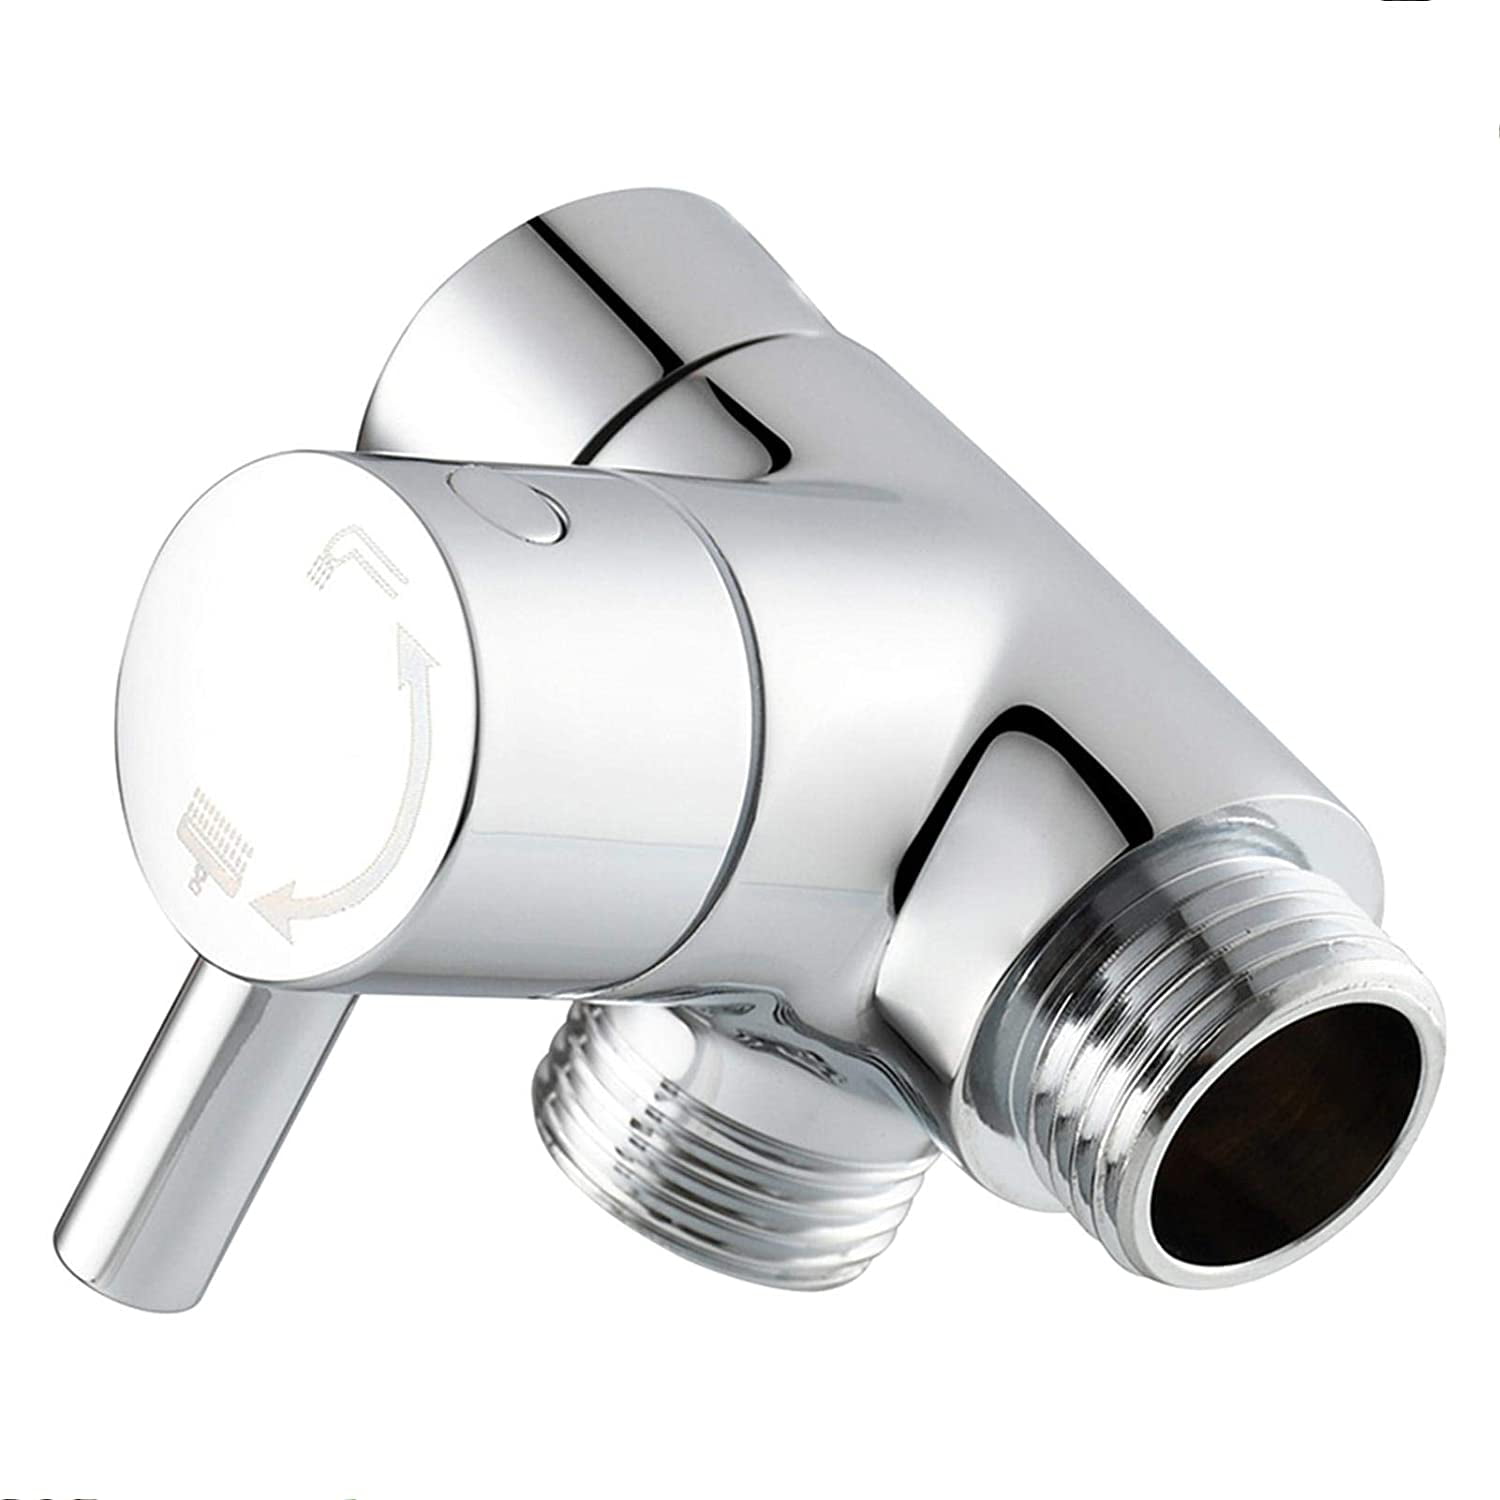 G 1/2 3-Way T-adapter for Toilet Bidet Shower Head Diverter ValveComponent Replacement Part Chrome 2 Pack Shower Arm Diverter Valve for Handheld Showerhead and Fixed Spray Head